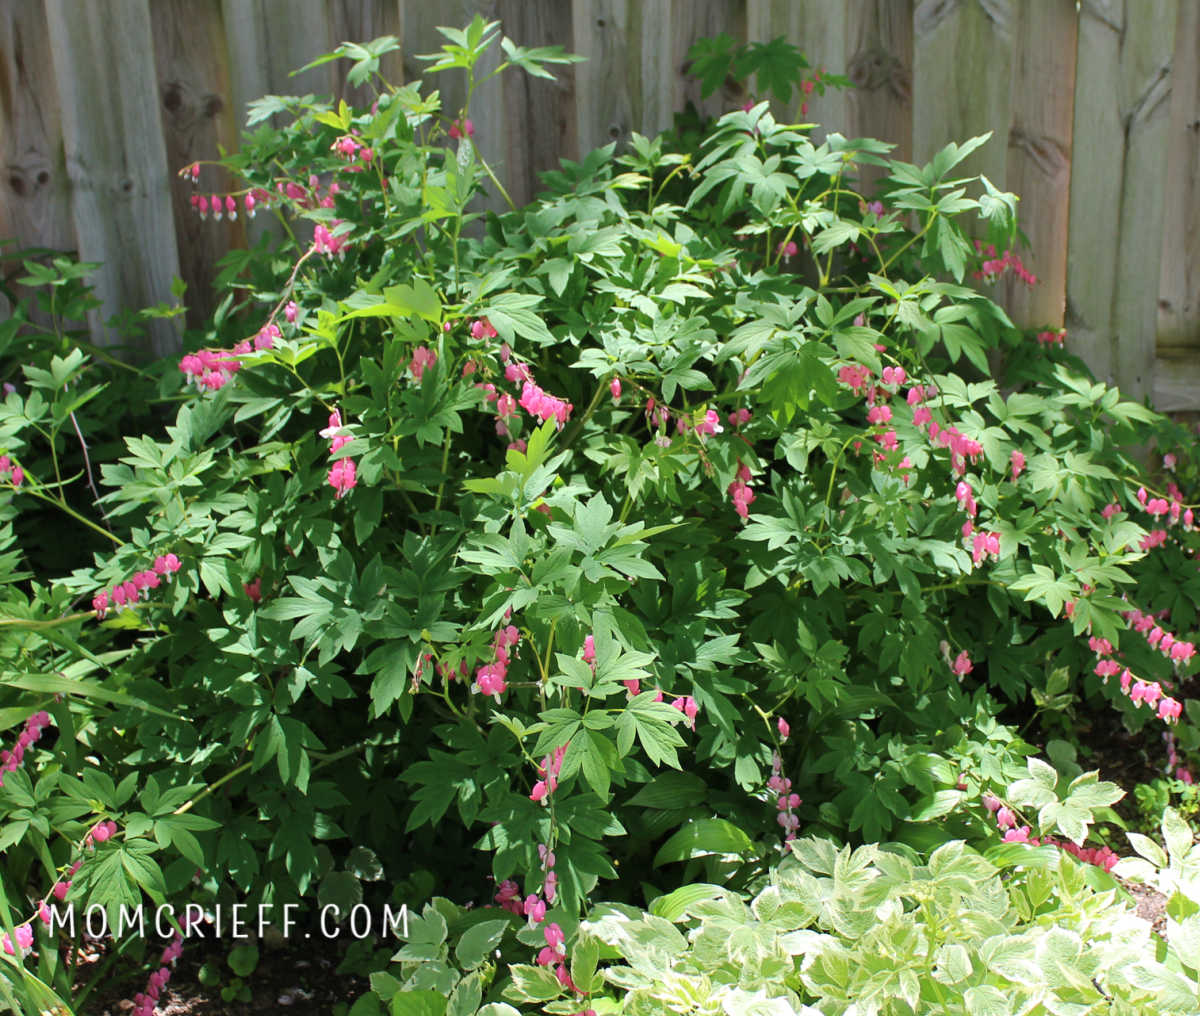 view of a bleeding heart plant with pink blossoms